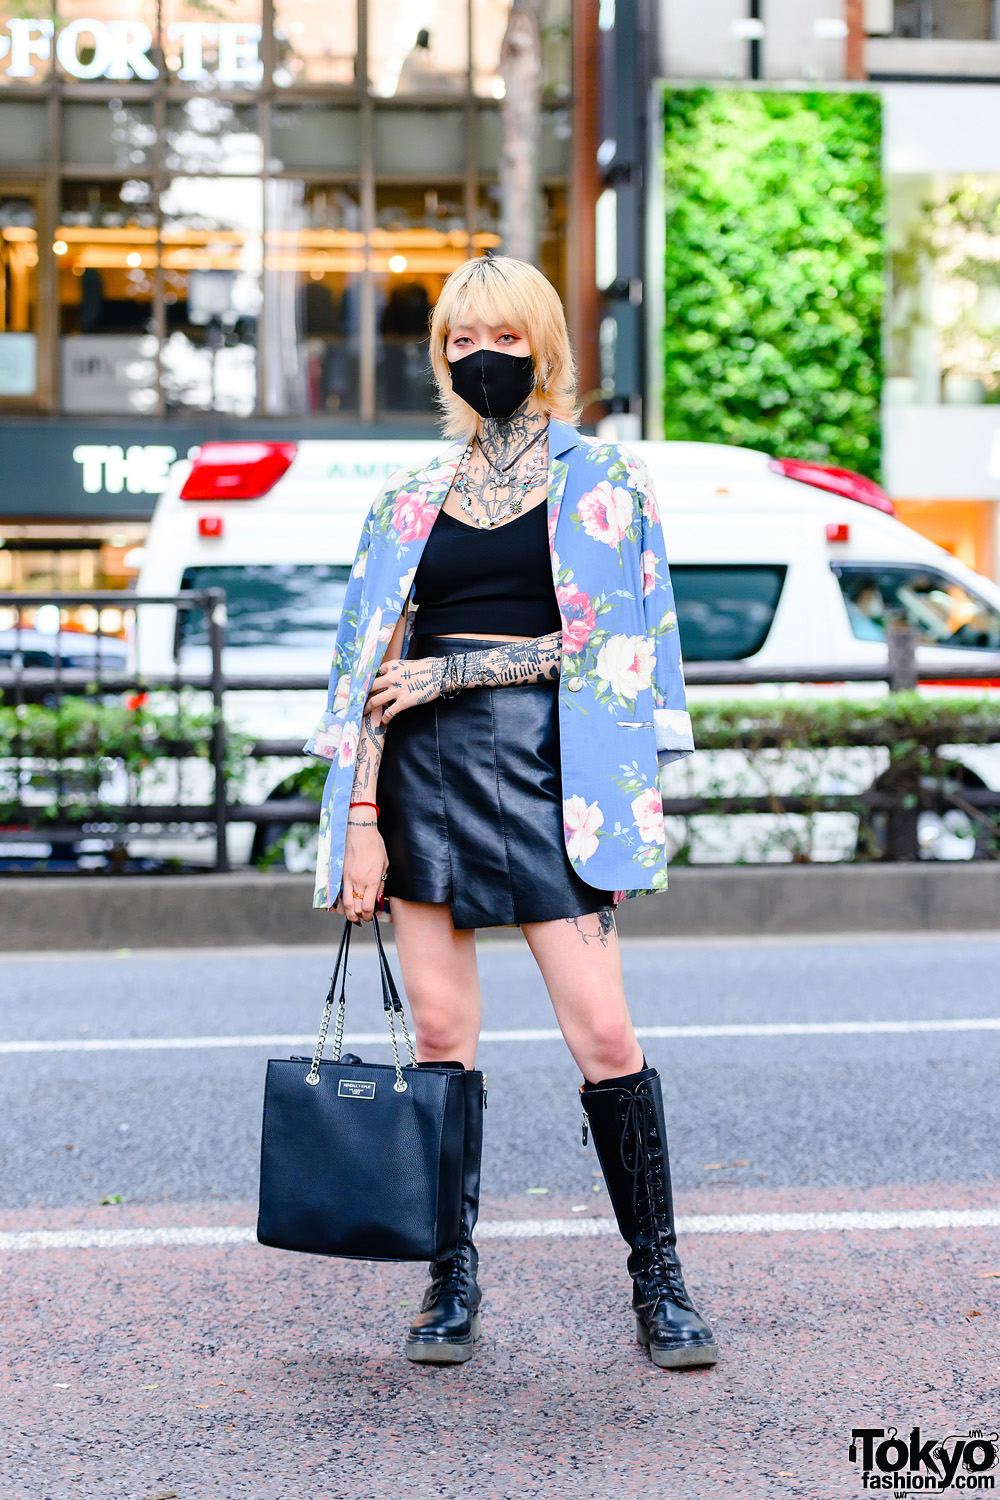 Japanese Tattoo Model in Harajuku w/ Black Mask, Funktique Floral Blazer, Belle Lingerie, Asymmetric Mini Skirt, Kendall + Kylie Tote & Open The Door Boots